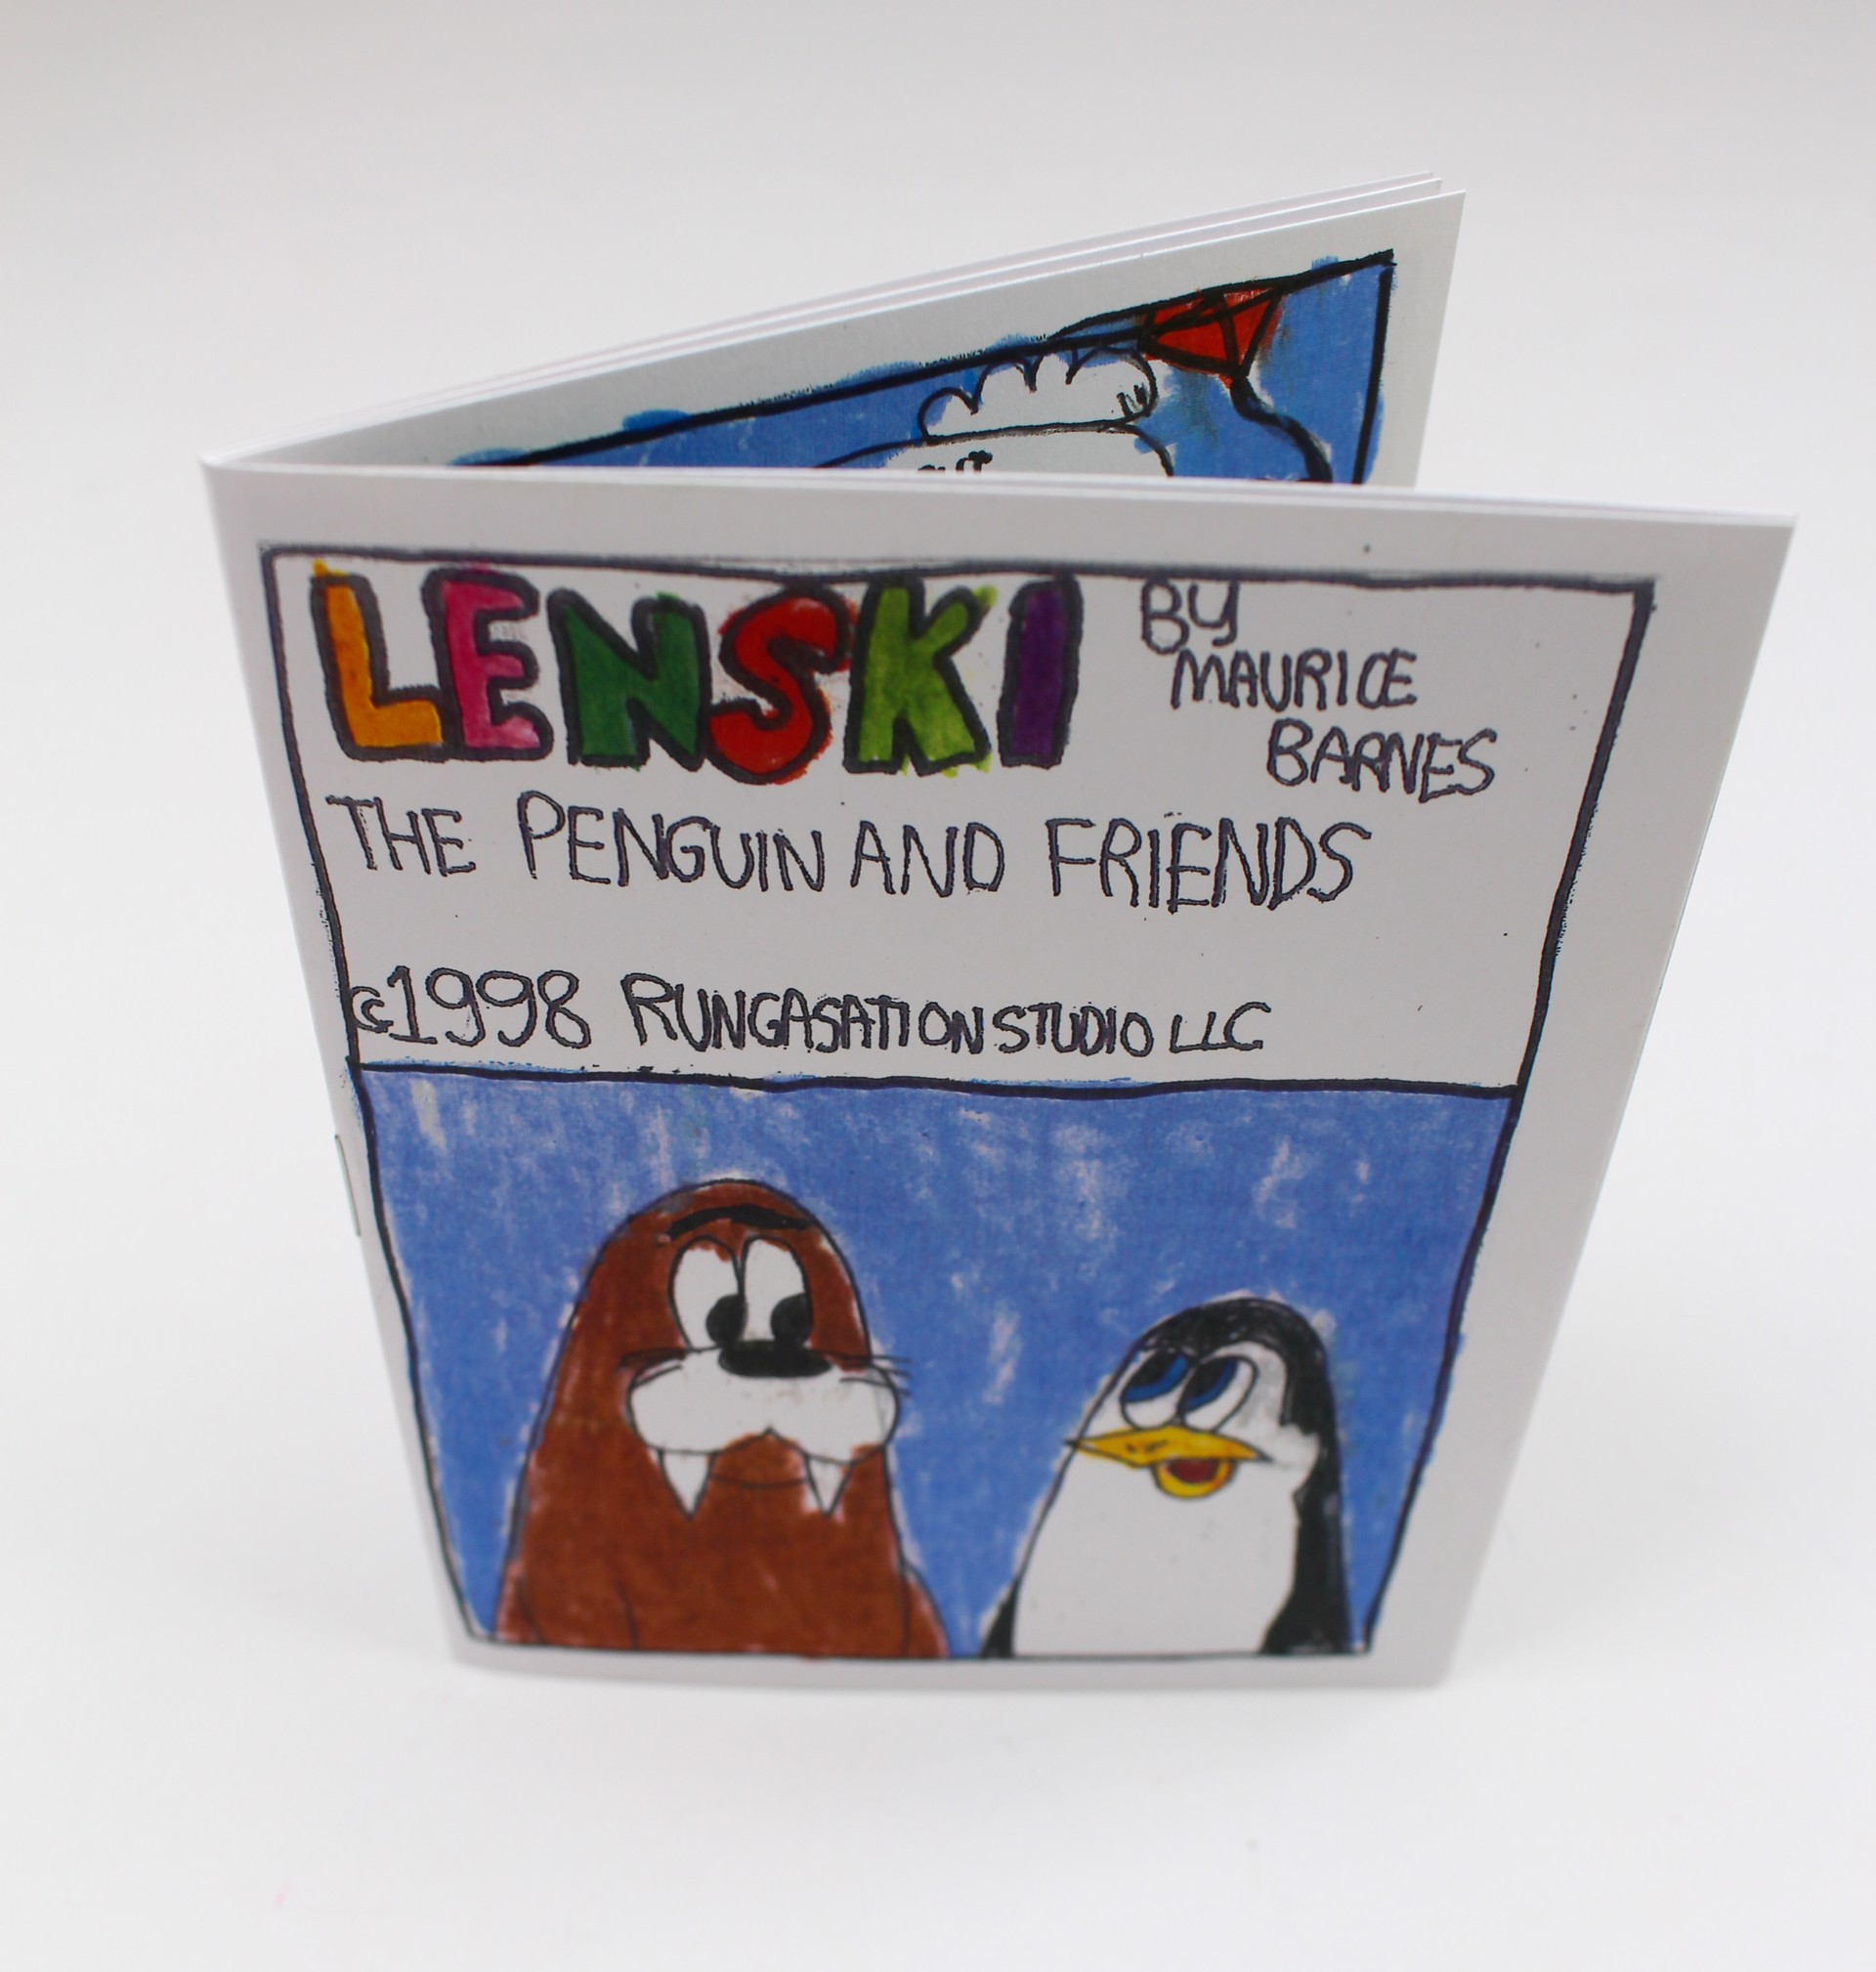 Lenski the Penguin and Friends: A Mini-Book by Maurice Barnes